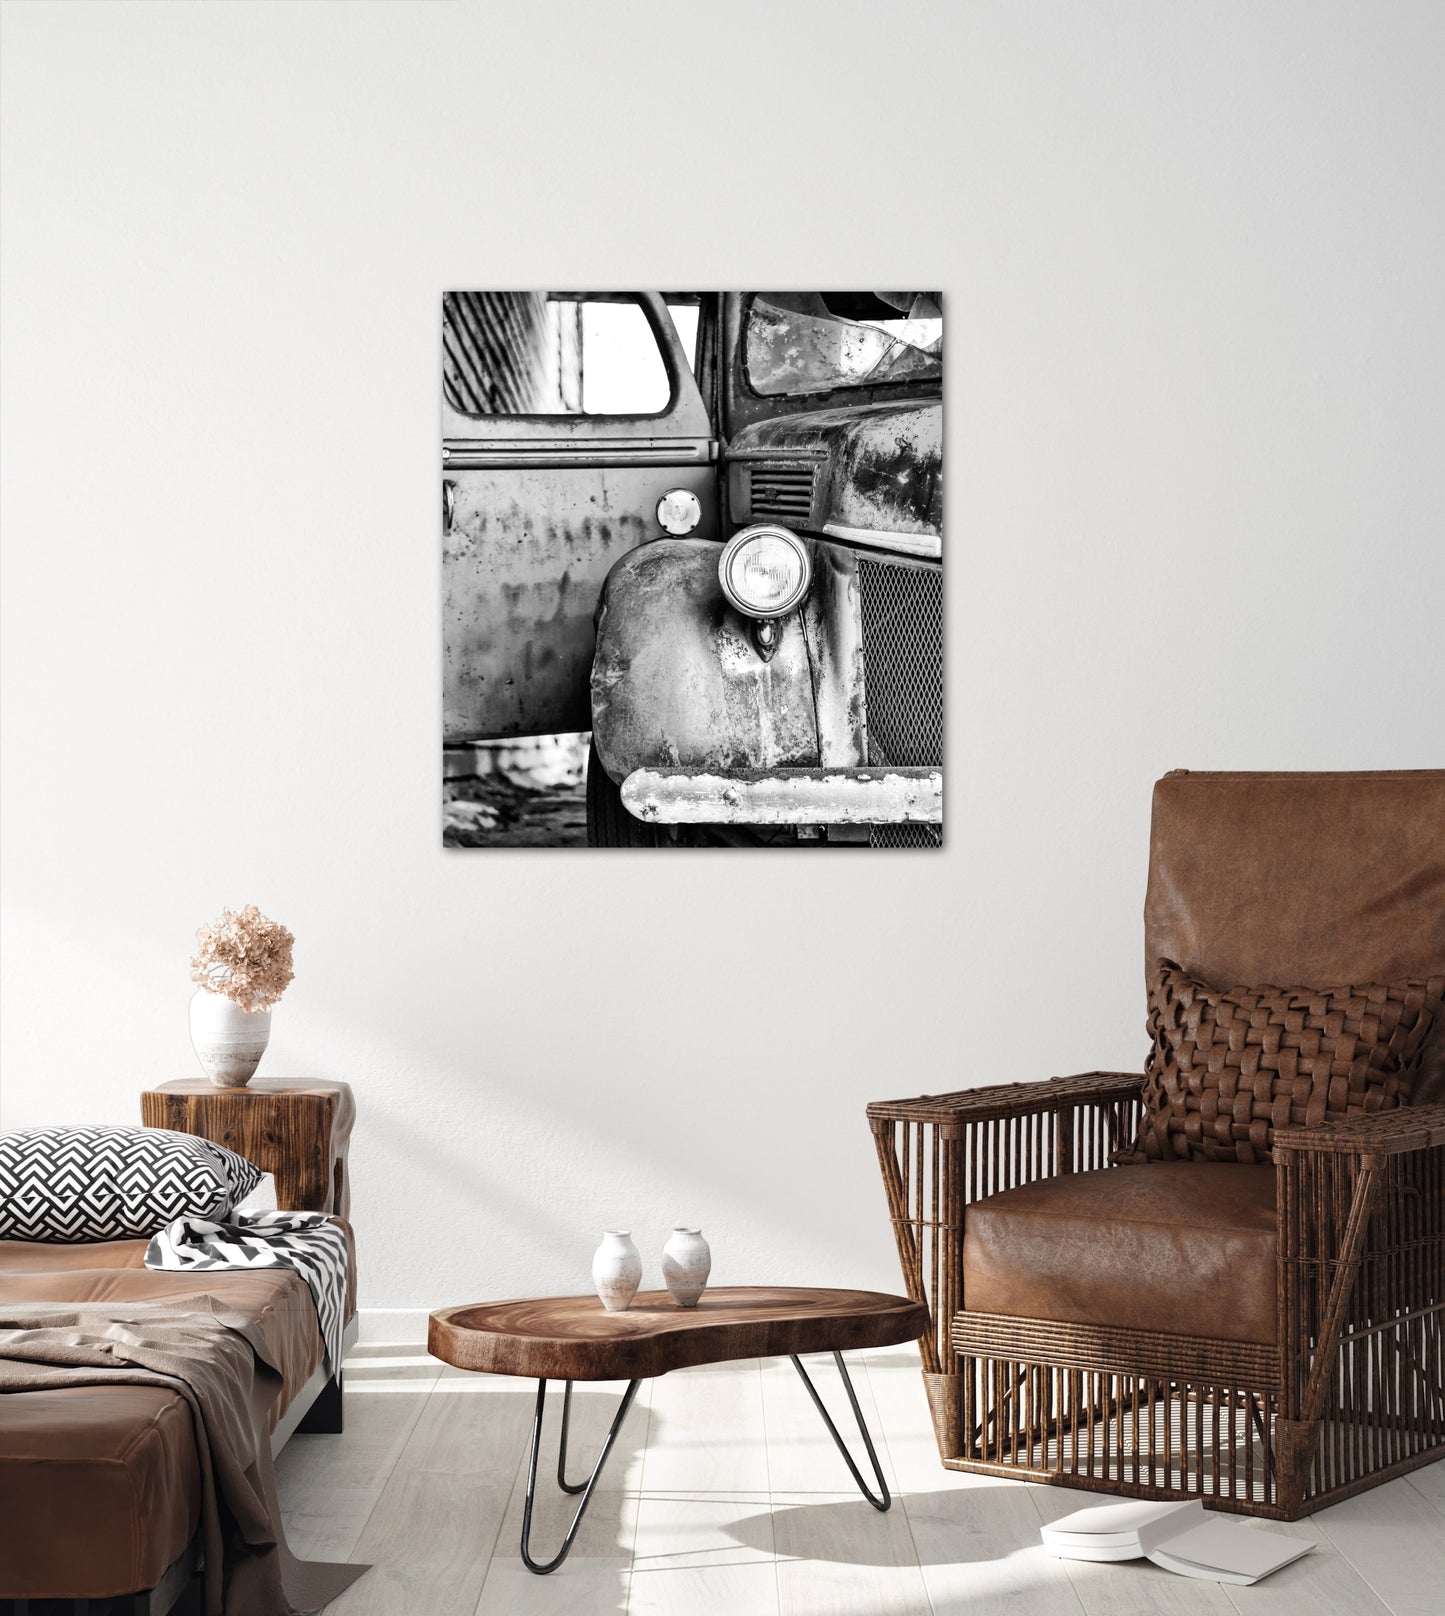 Rustic Ford truck barn photography canvas print on living room wall